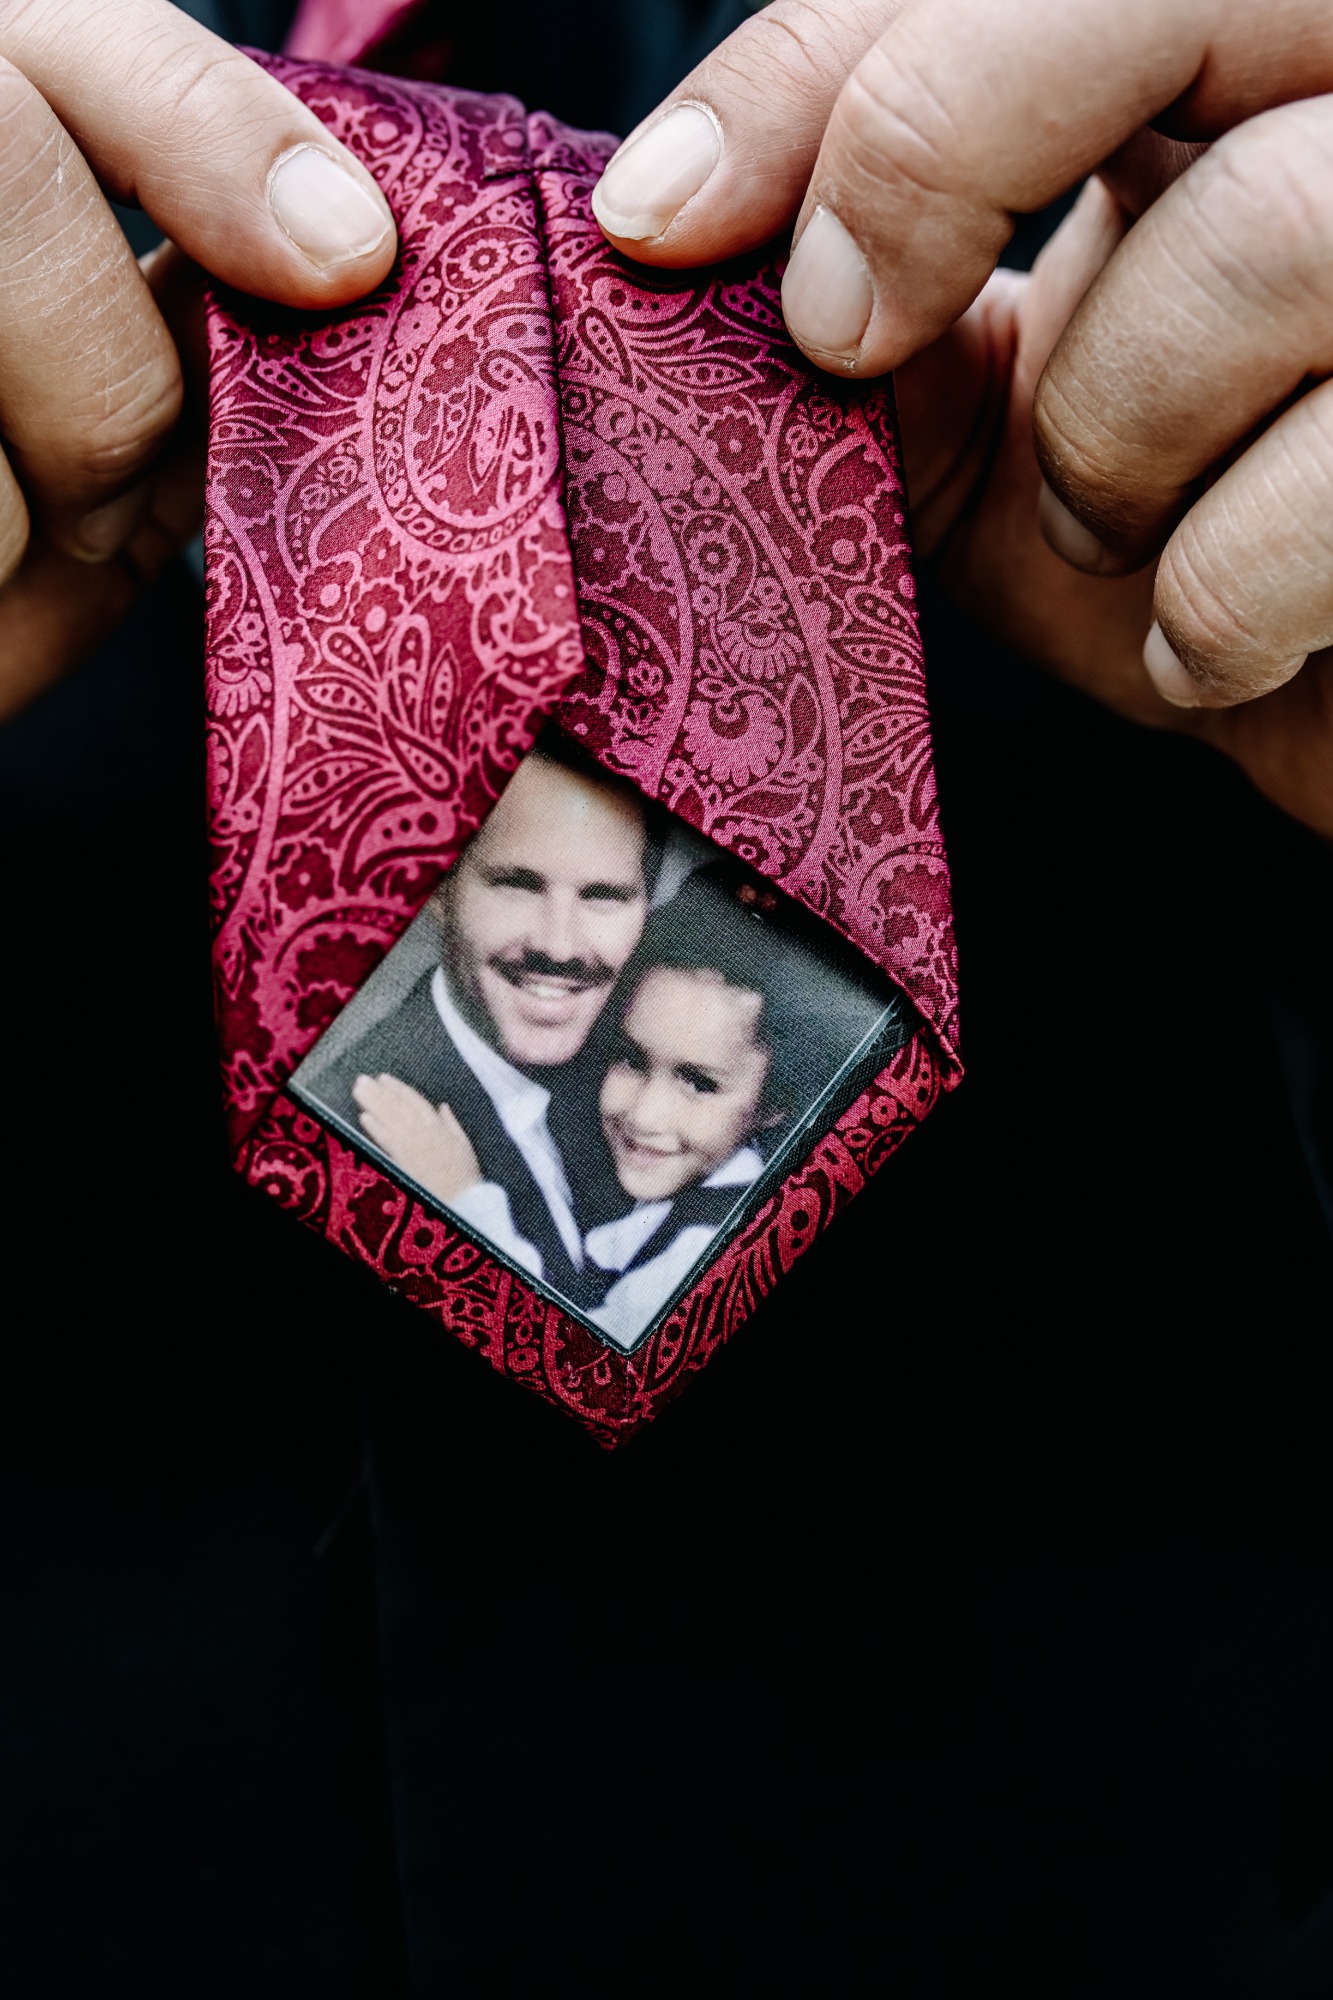 Dad has custom tie with photo of daughter 